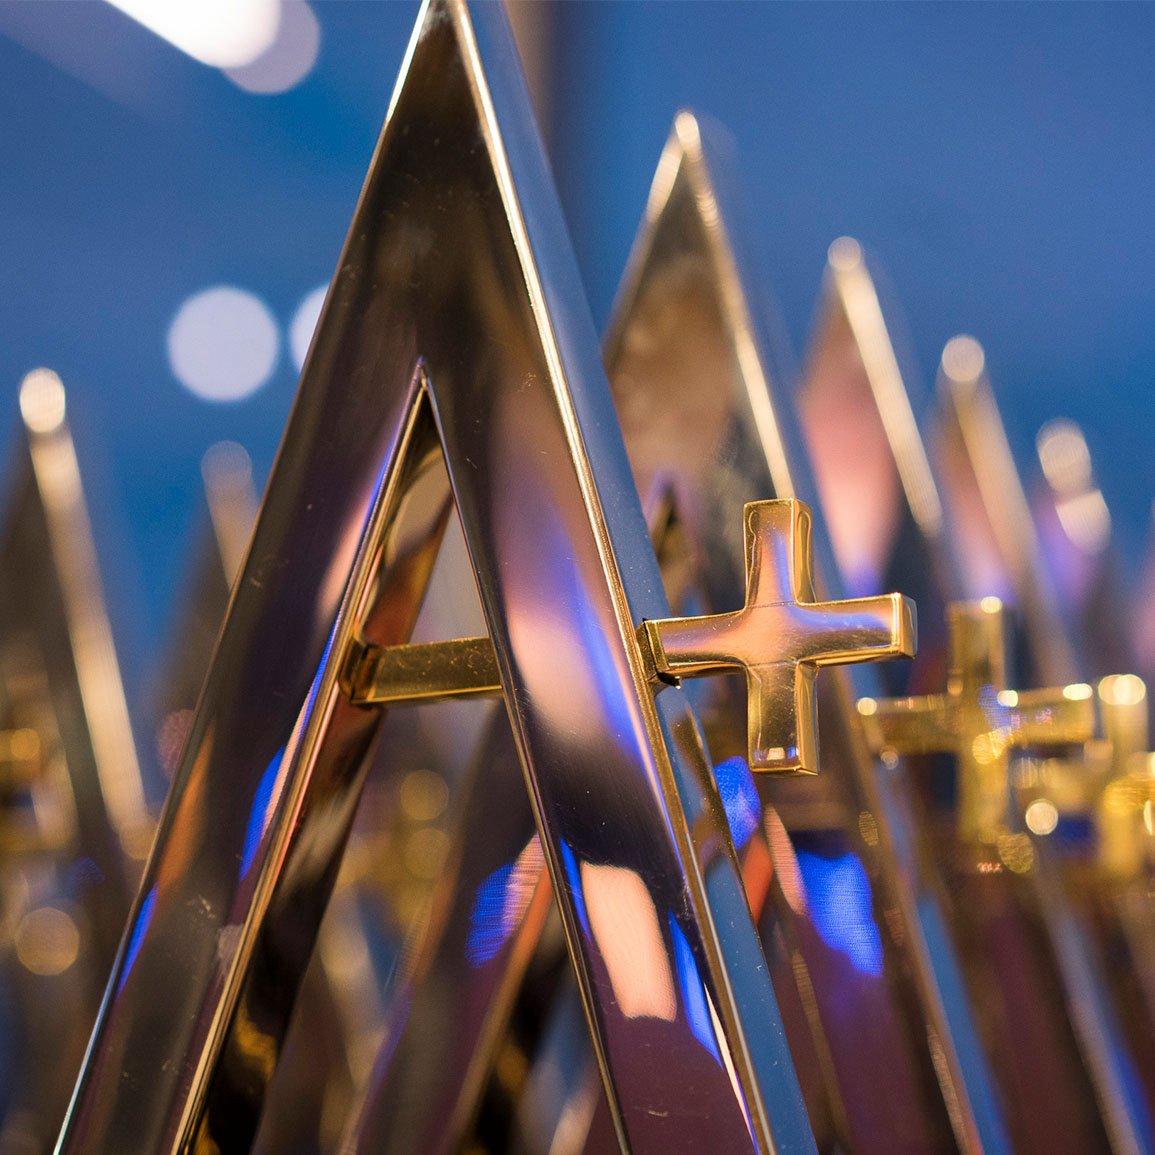 A row of golden FundGrade A+ awards lined up